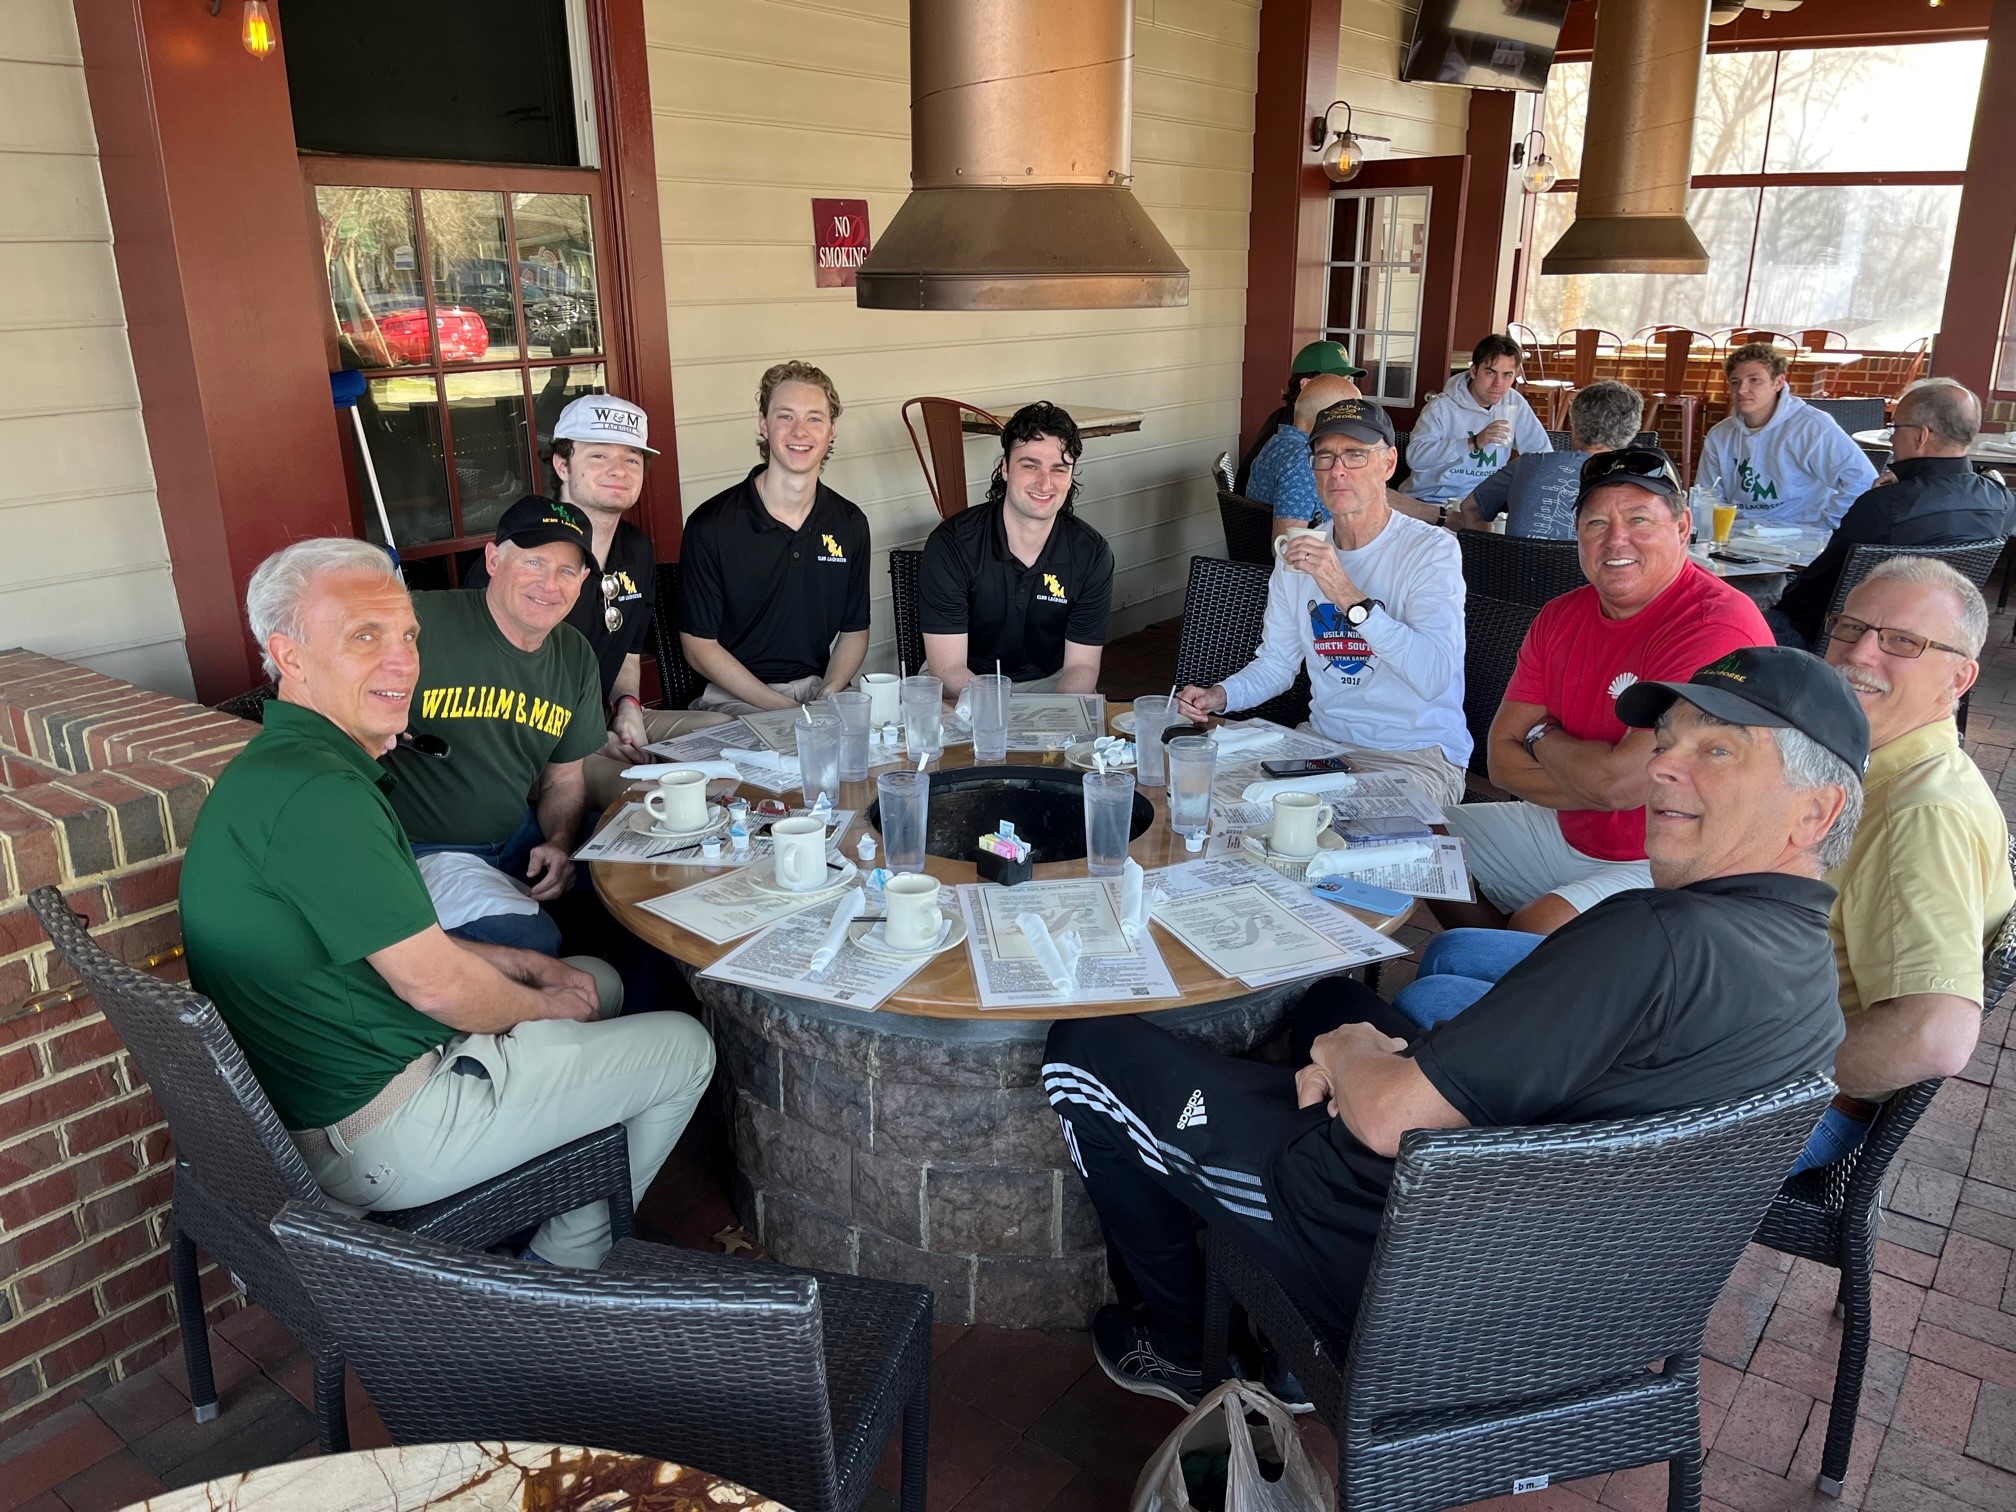 Lacrosse alumni having lunch with members of the current club team